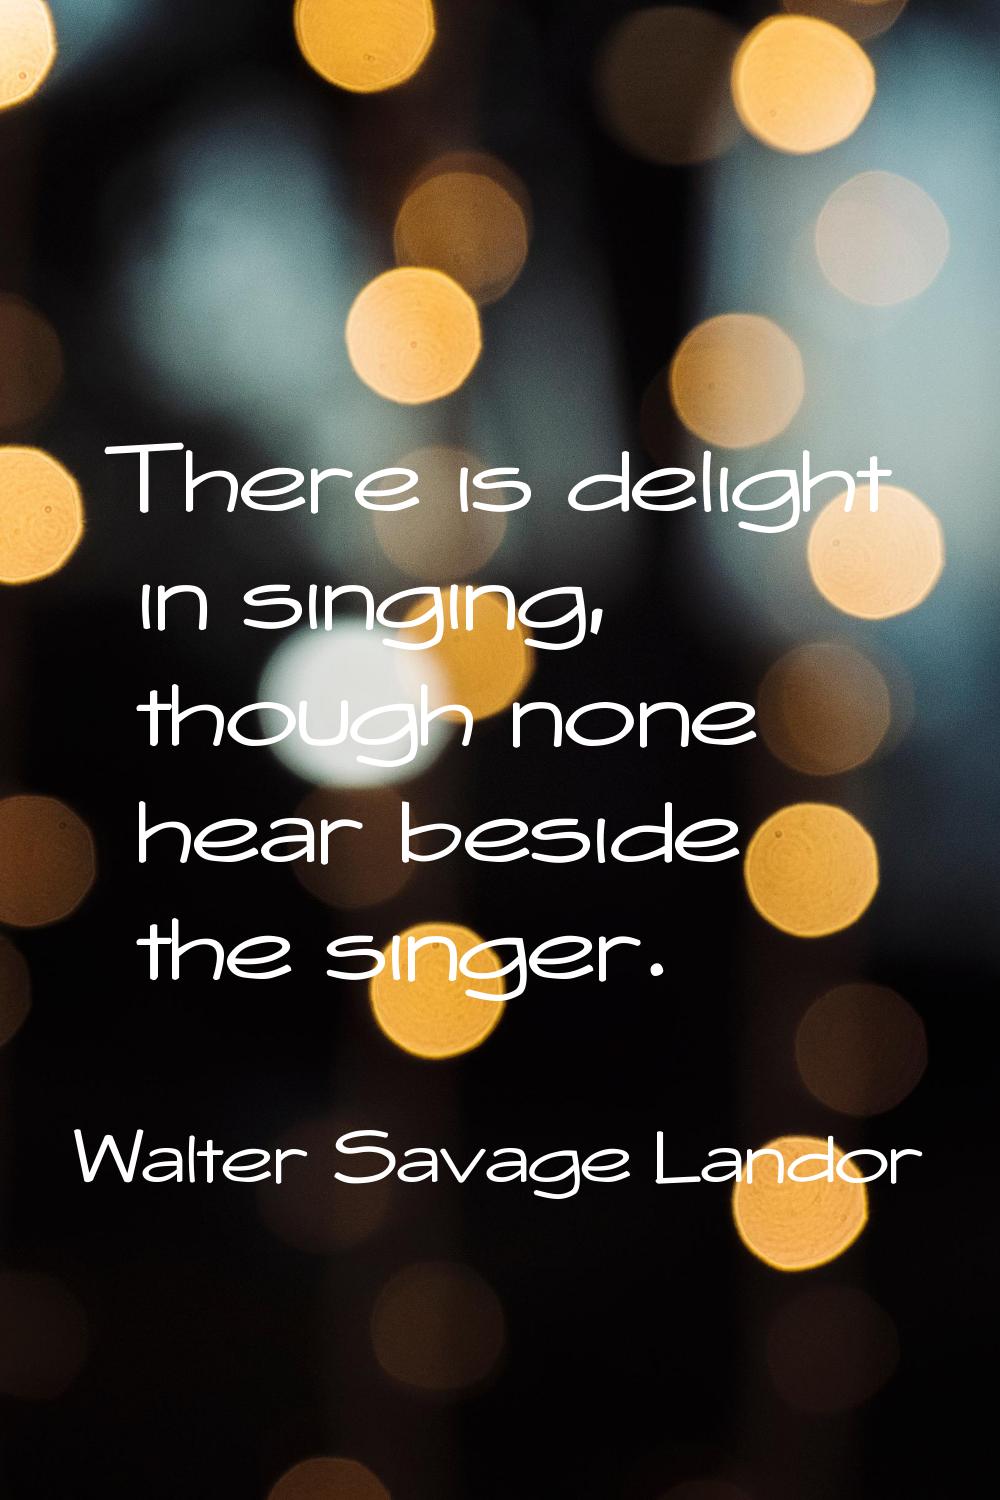 There is delight in singing, though none hear beside the singer.